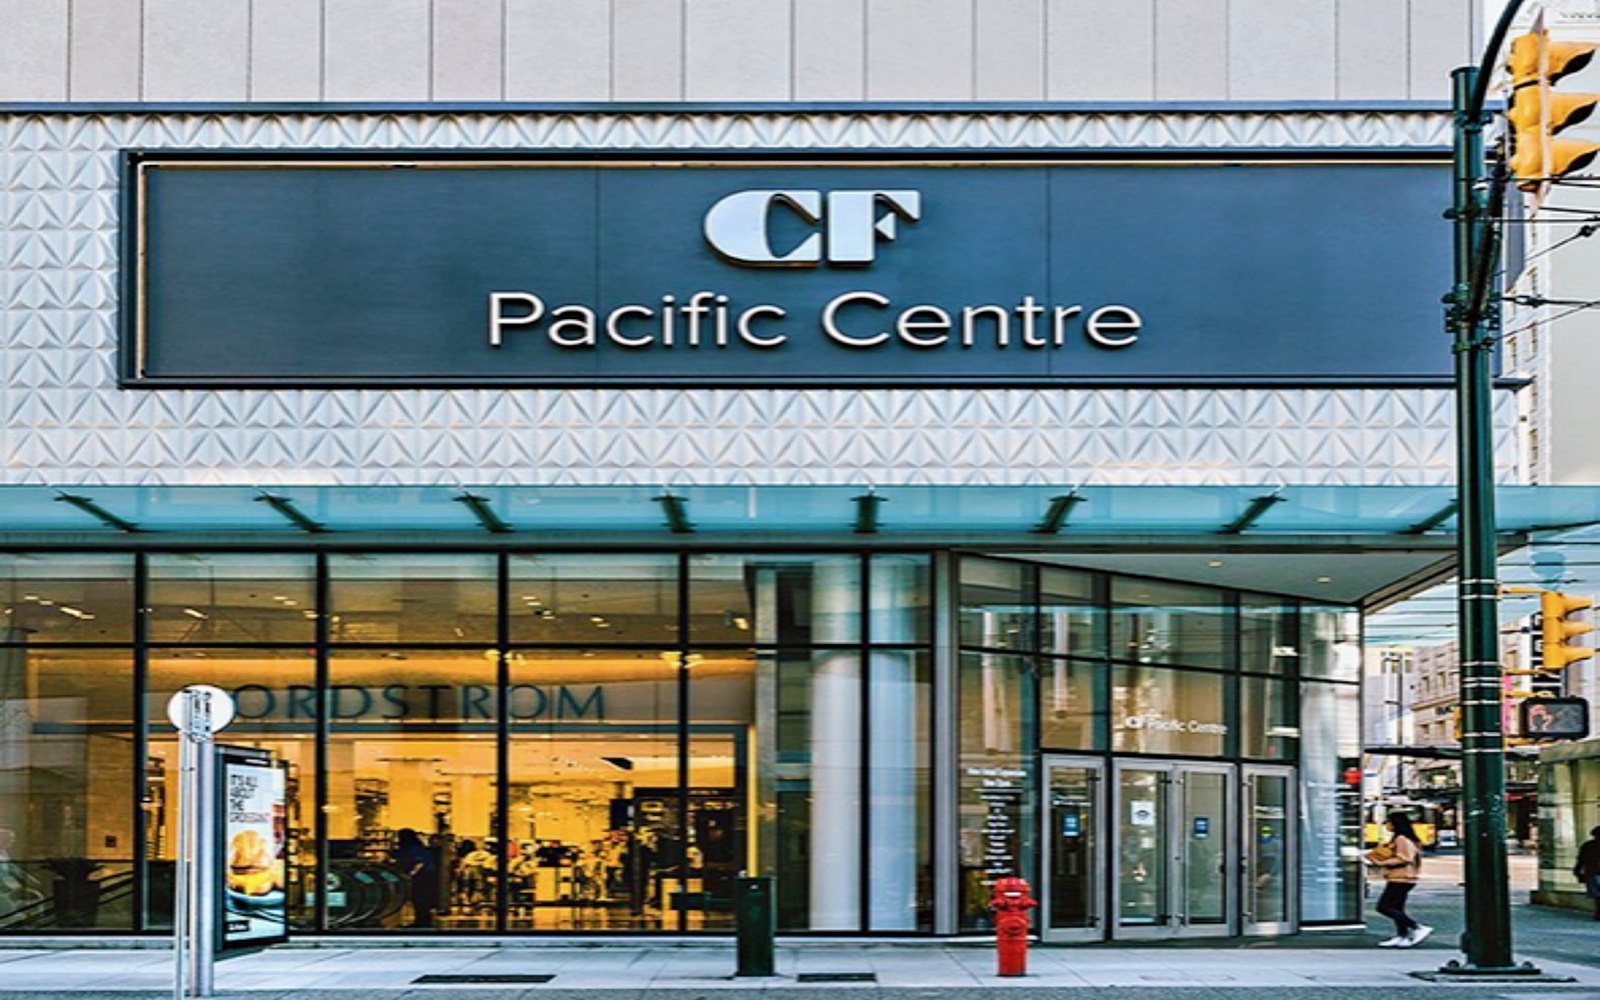 The entrance to Pacific Centre, Vancouver BC